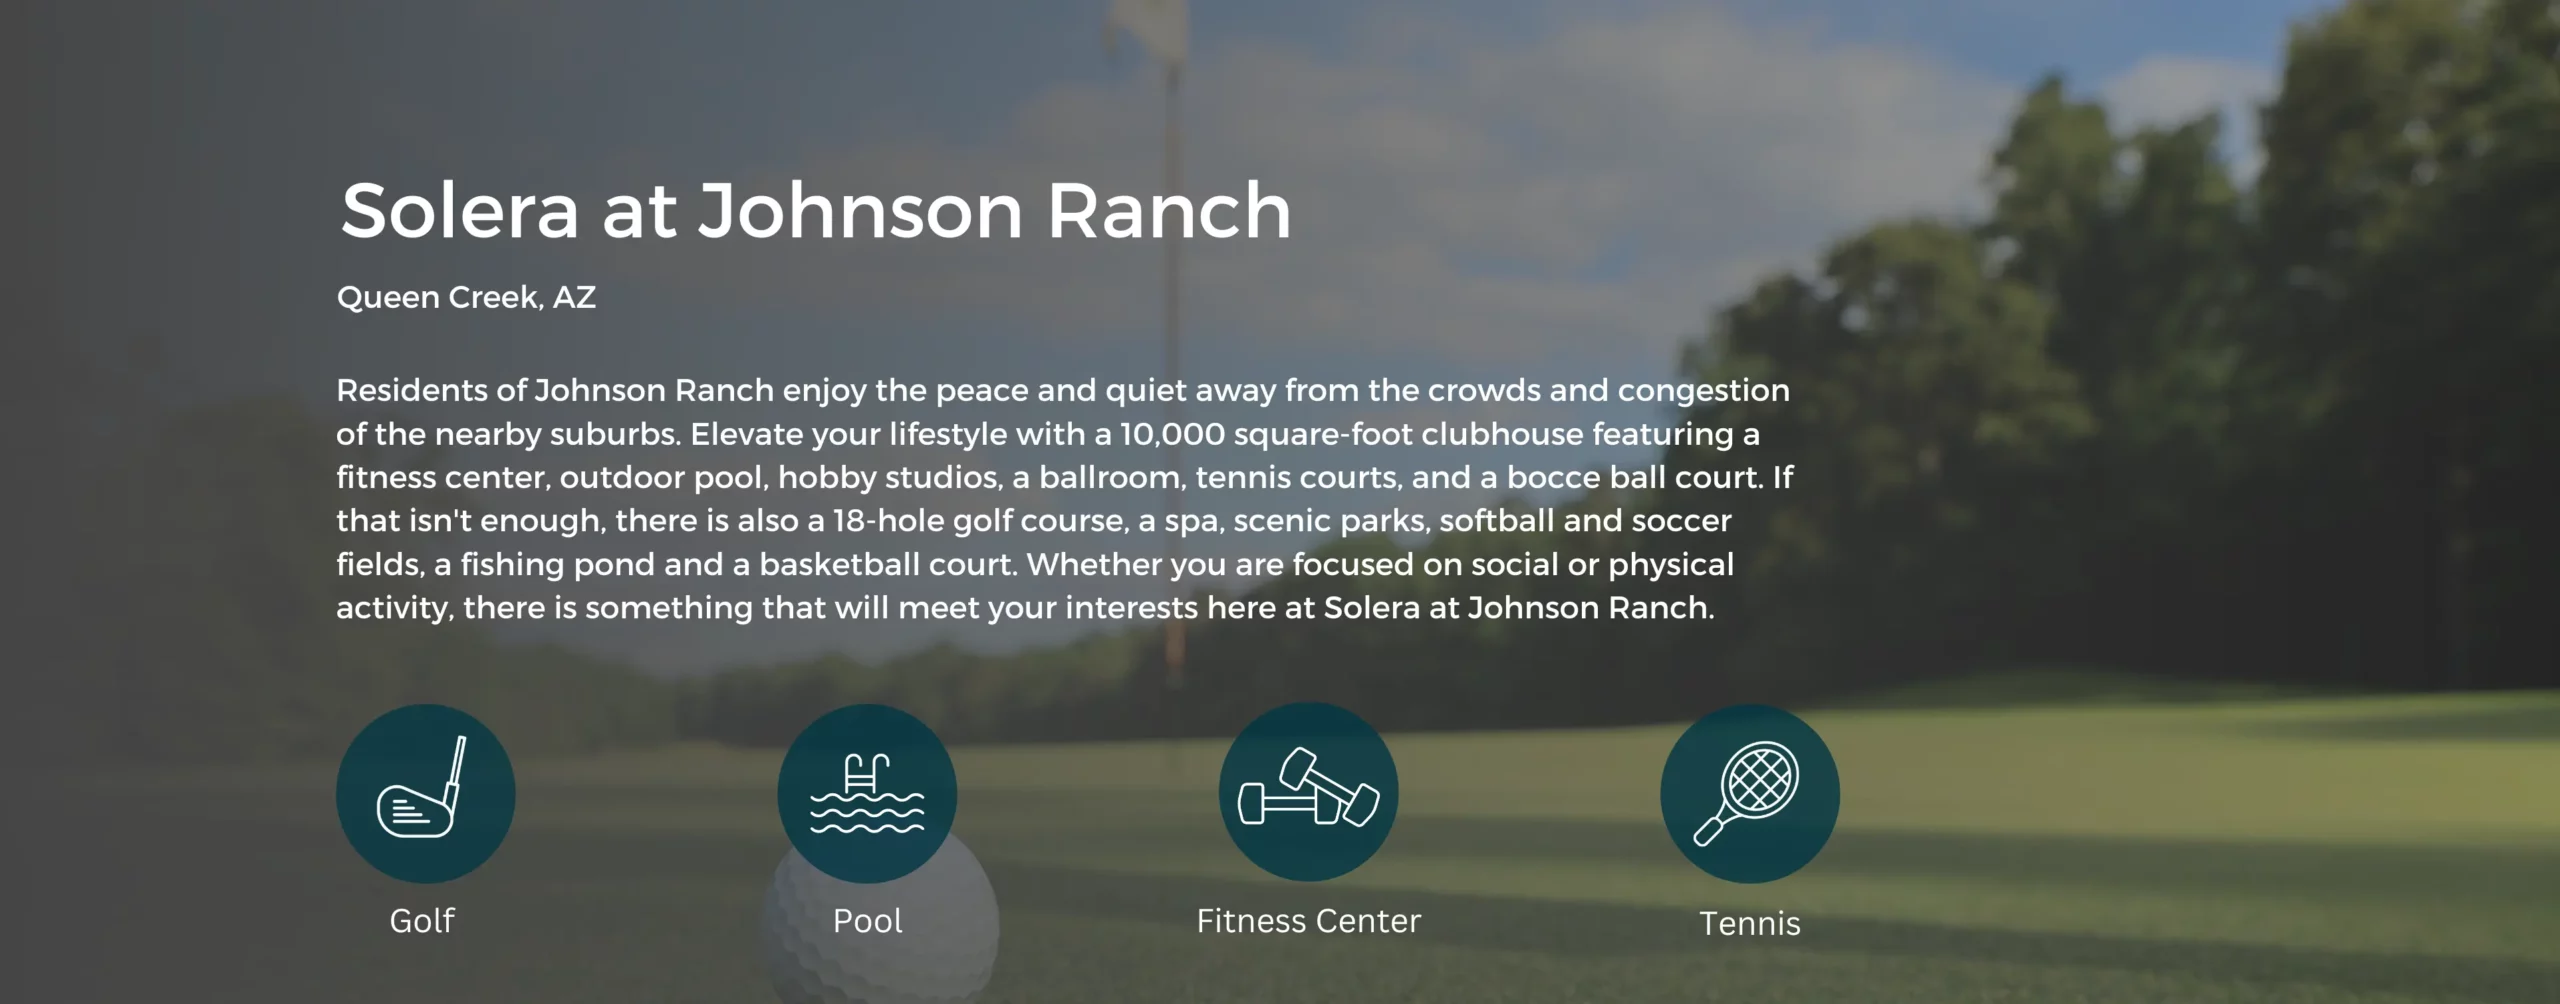 Icons showing Golf, Pool. Fitness Center, and Tennis. Background image is a golf course.